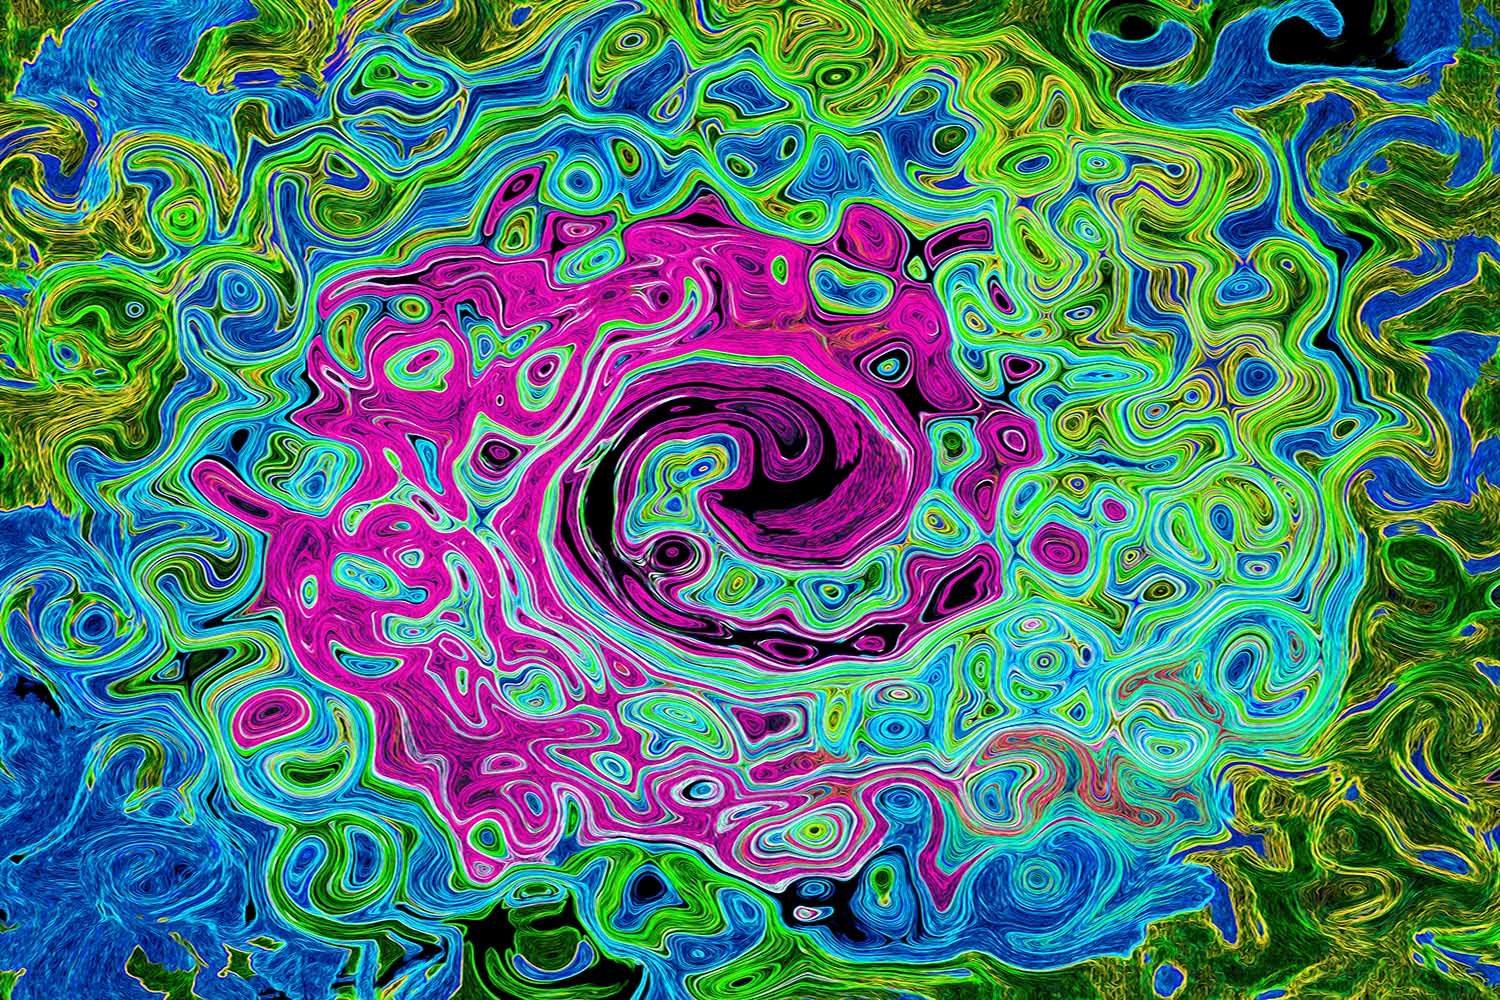 Hot Pink and Blue Groovy Abstract Retro Liquid Swirl